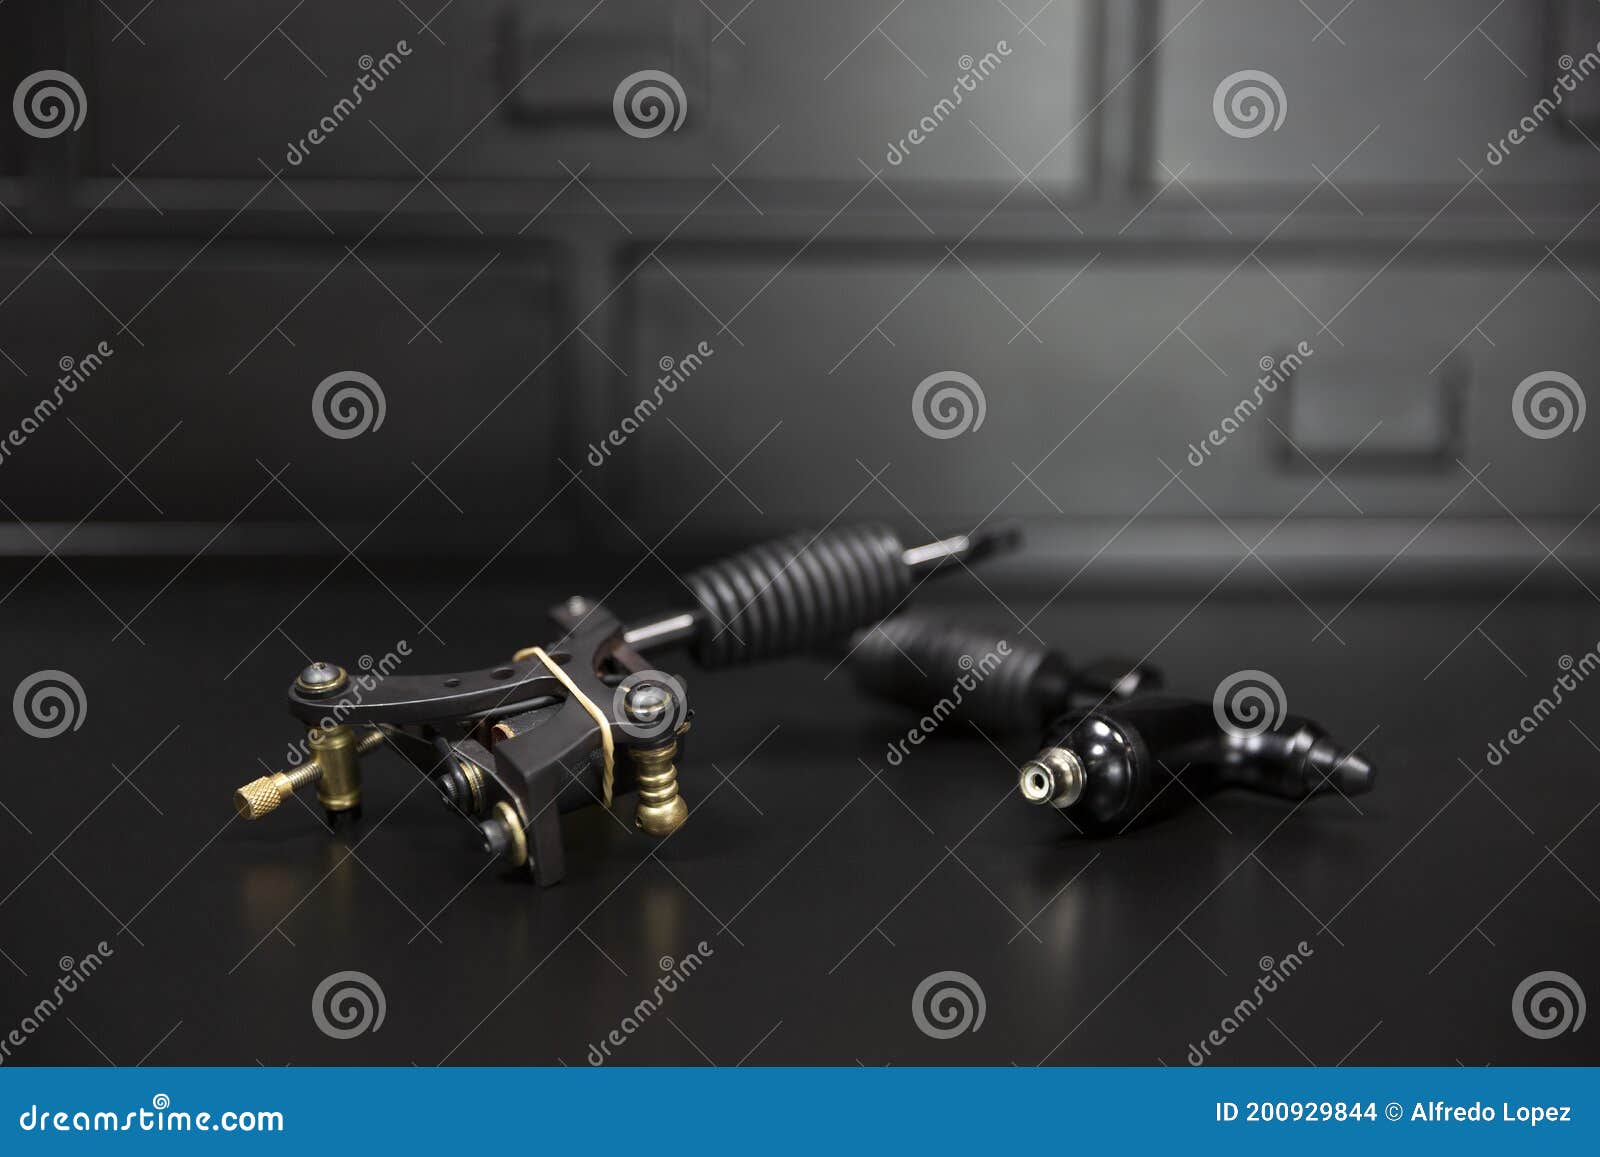 713 Coil Machine Tattoo Images Stock Photos  Vectors  Shutterstock